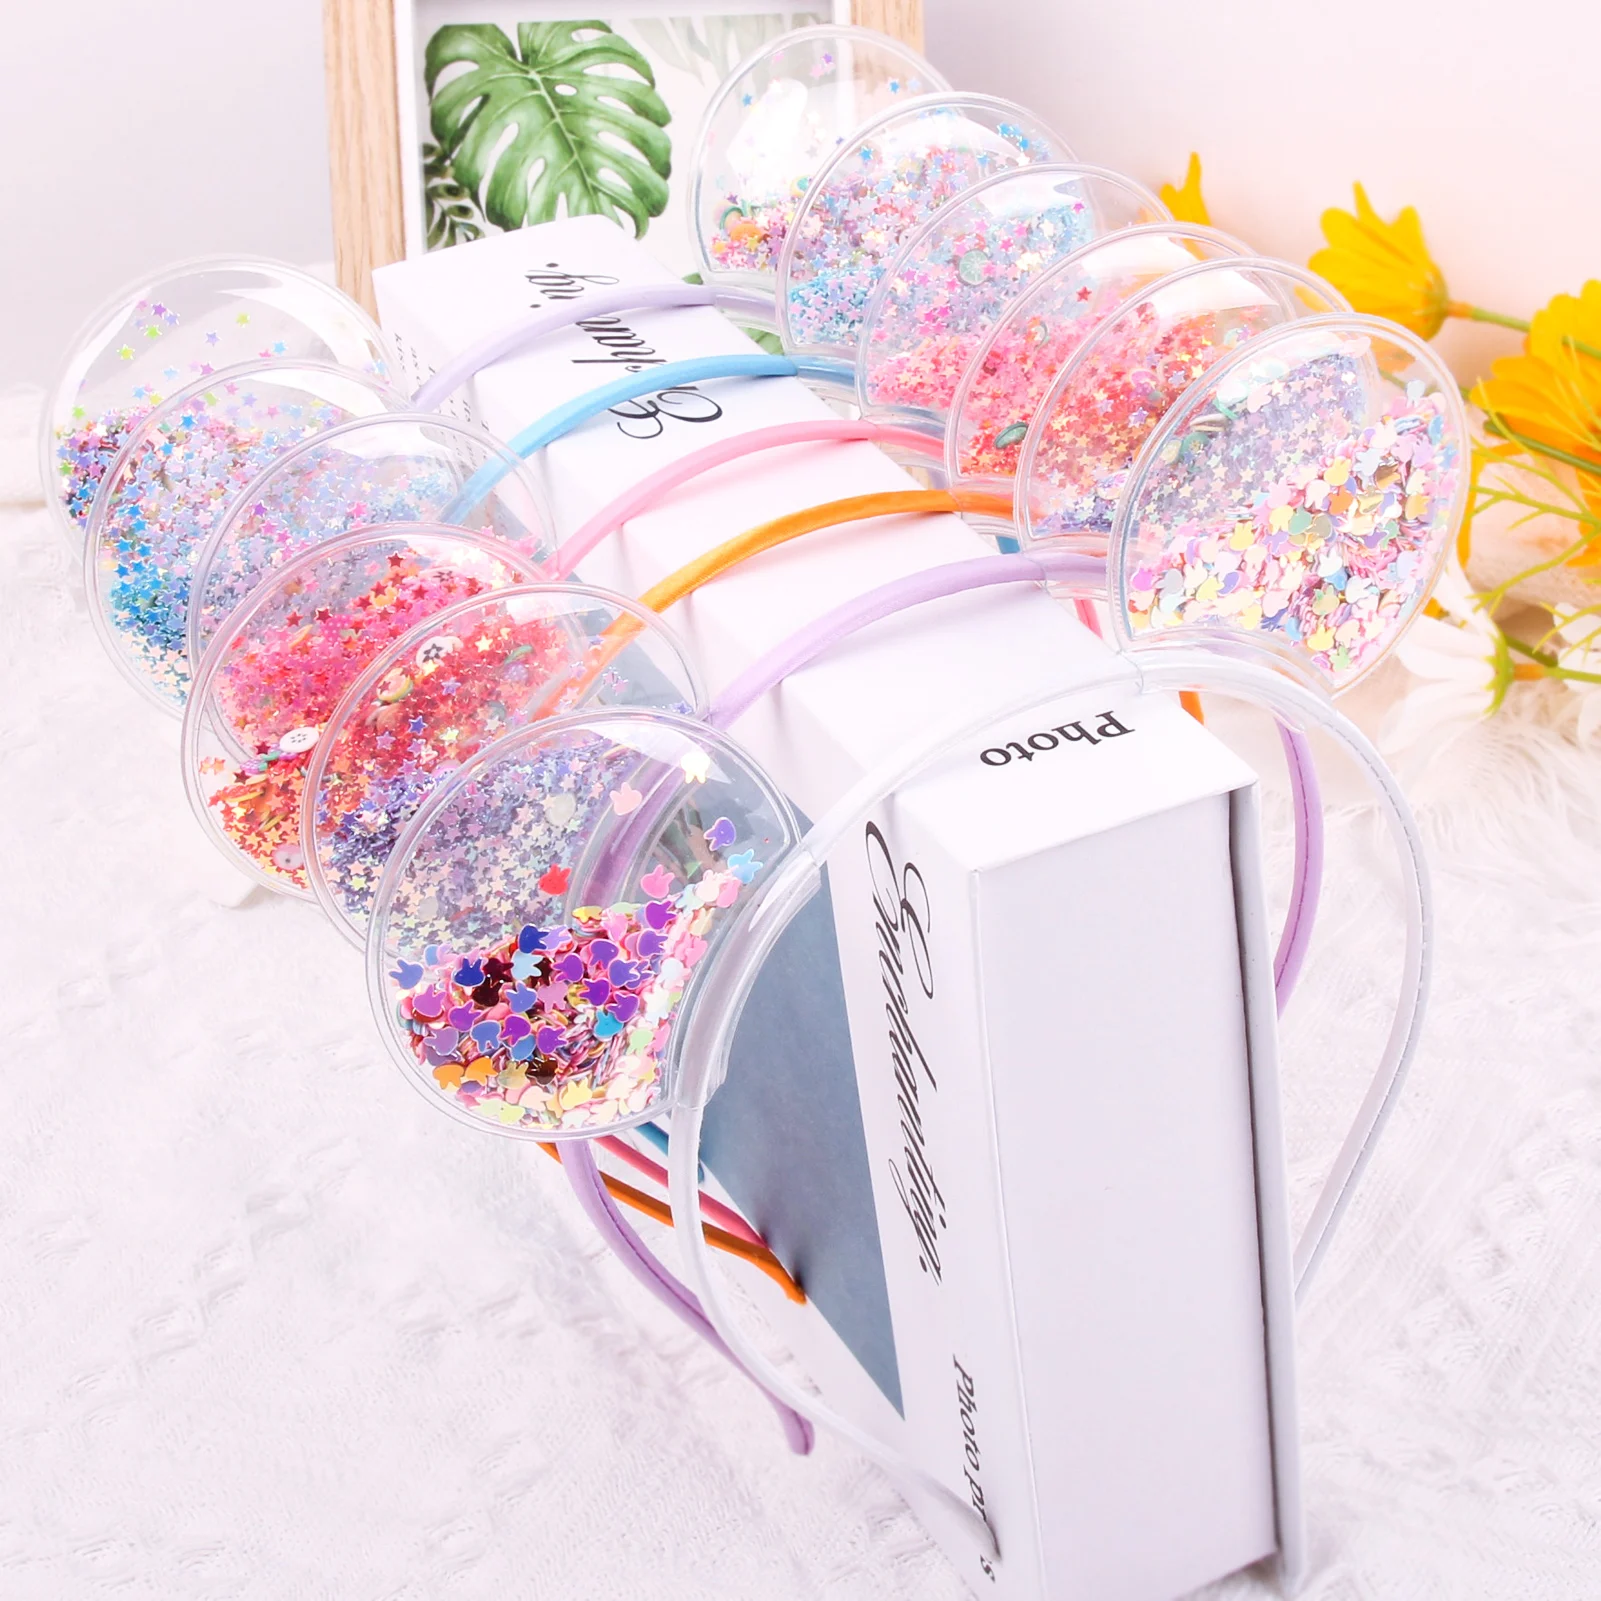 Candygirl Transparent Cat Ears Headband Quicksand Bows Hair Hoop Cute Colorful Sequins Hairbands Girls Princess Hair Accessories candygirl cat ears headbands for kids cute crown diamond hair bands for girls shiny sequins hairbands gifts hair accessories